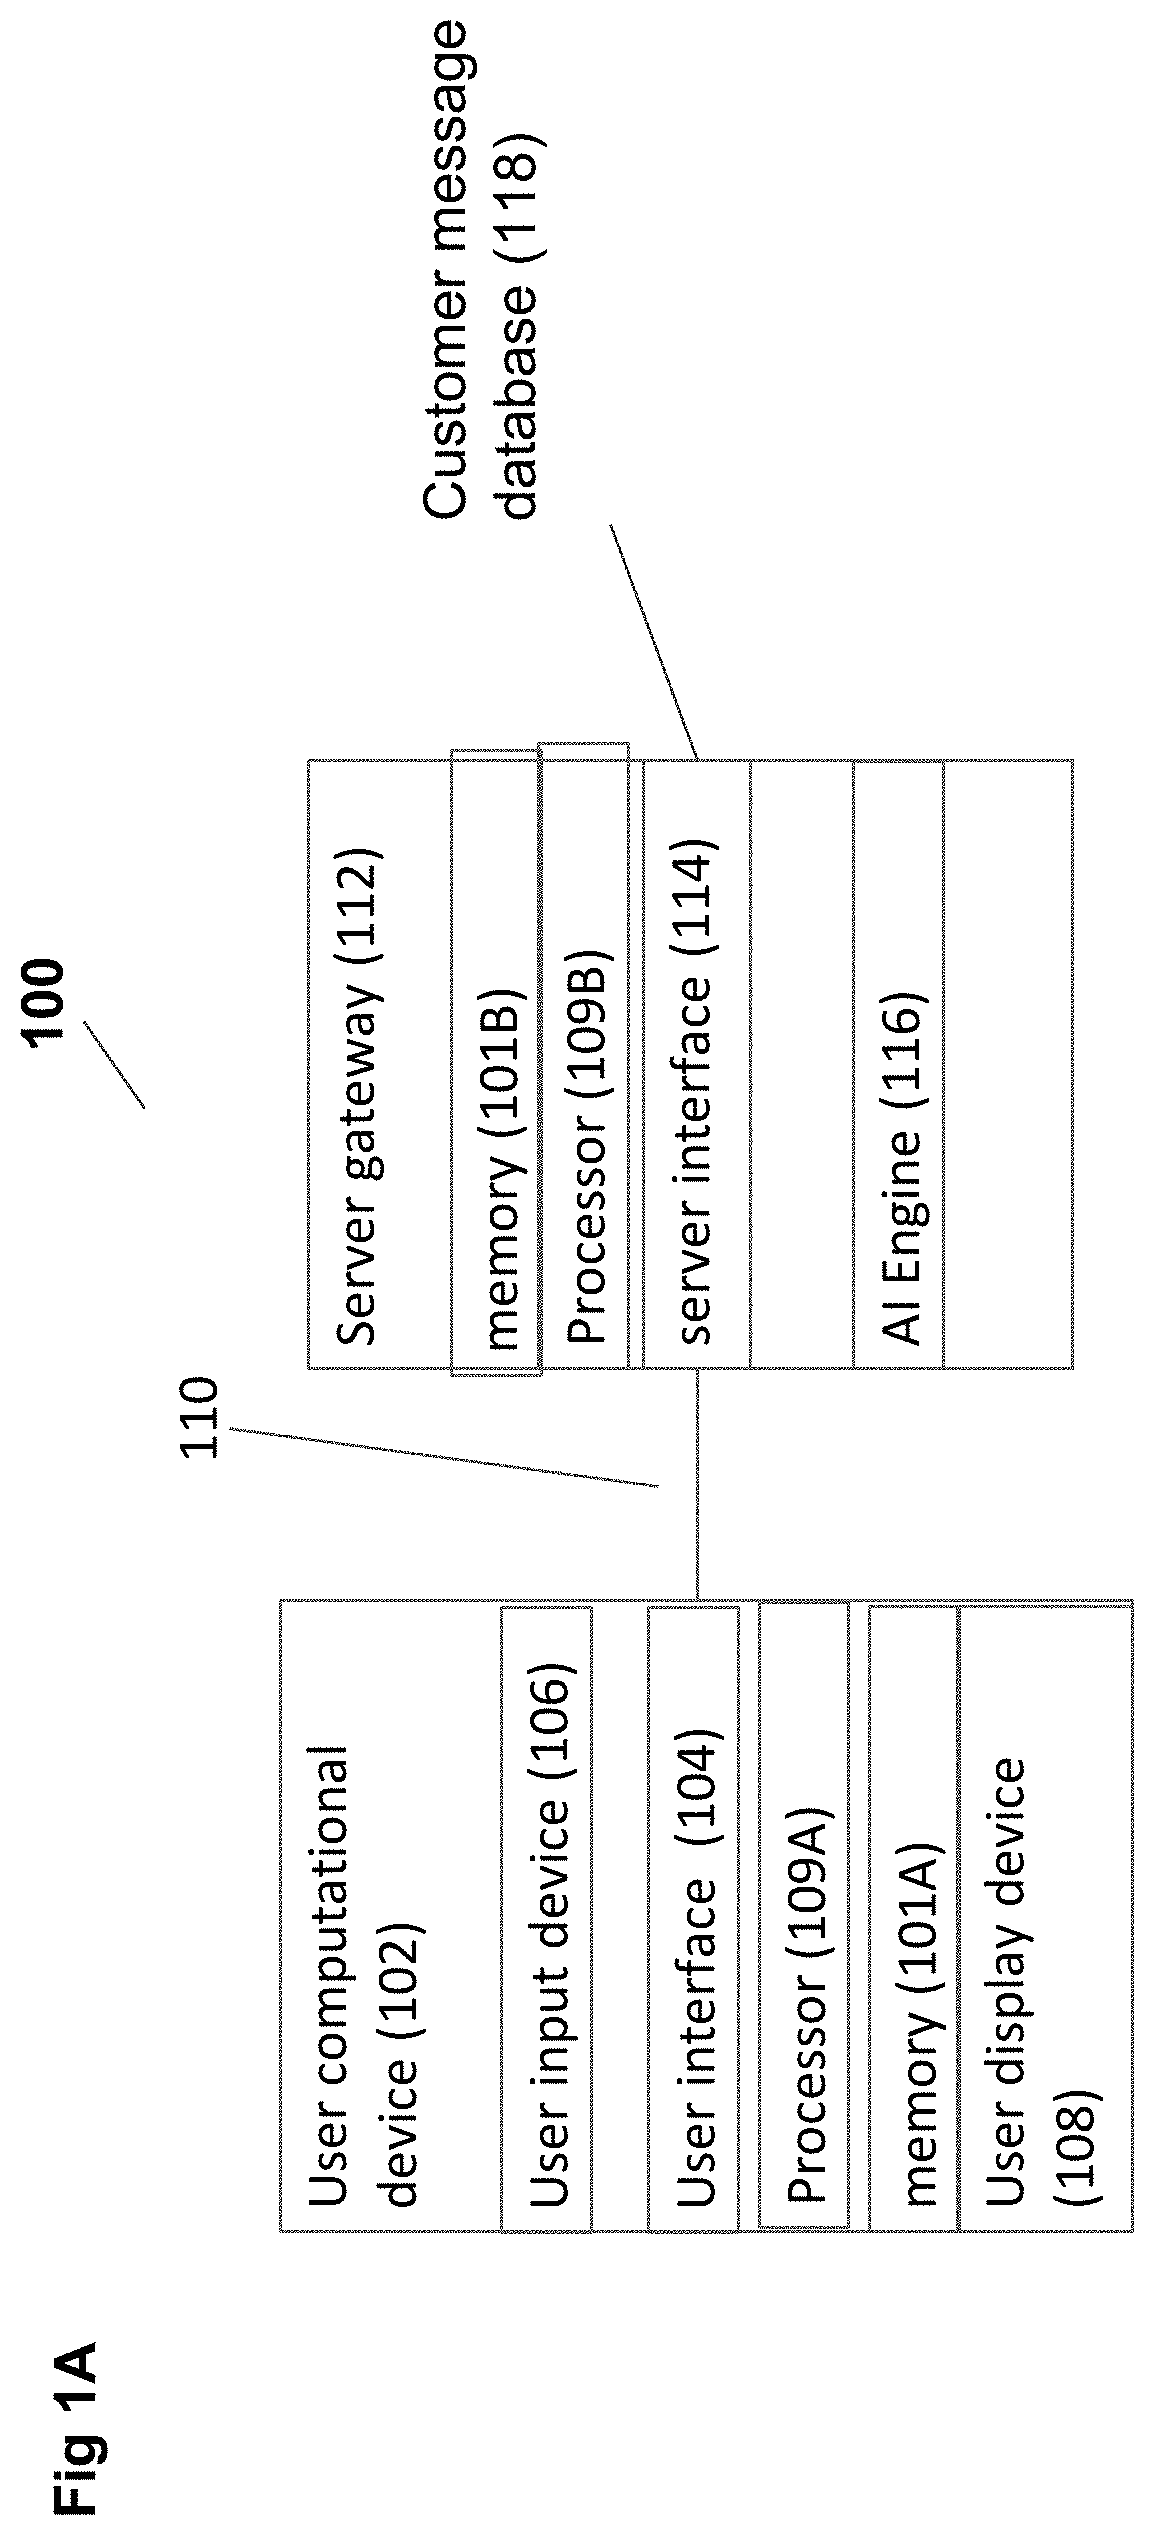 System and method for automatically tagging customer messages using artificial intelligence models